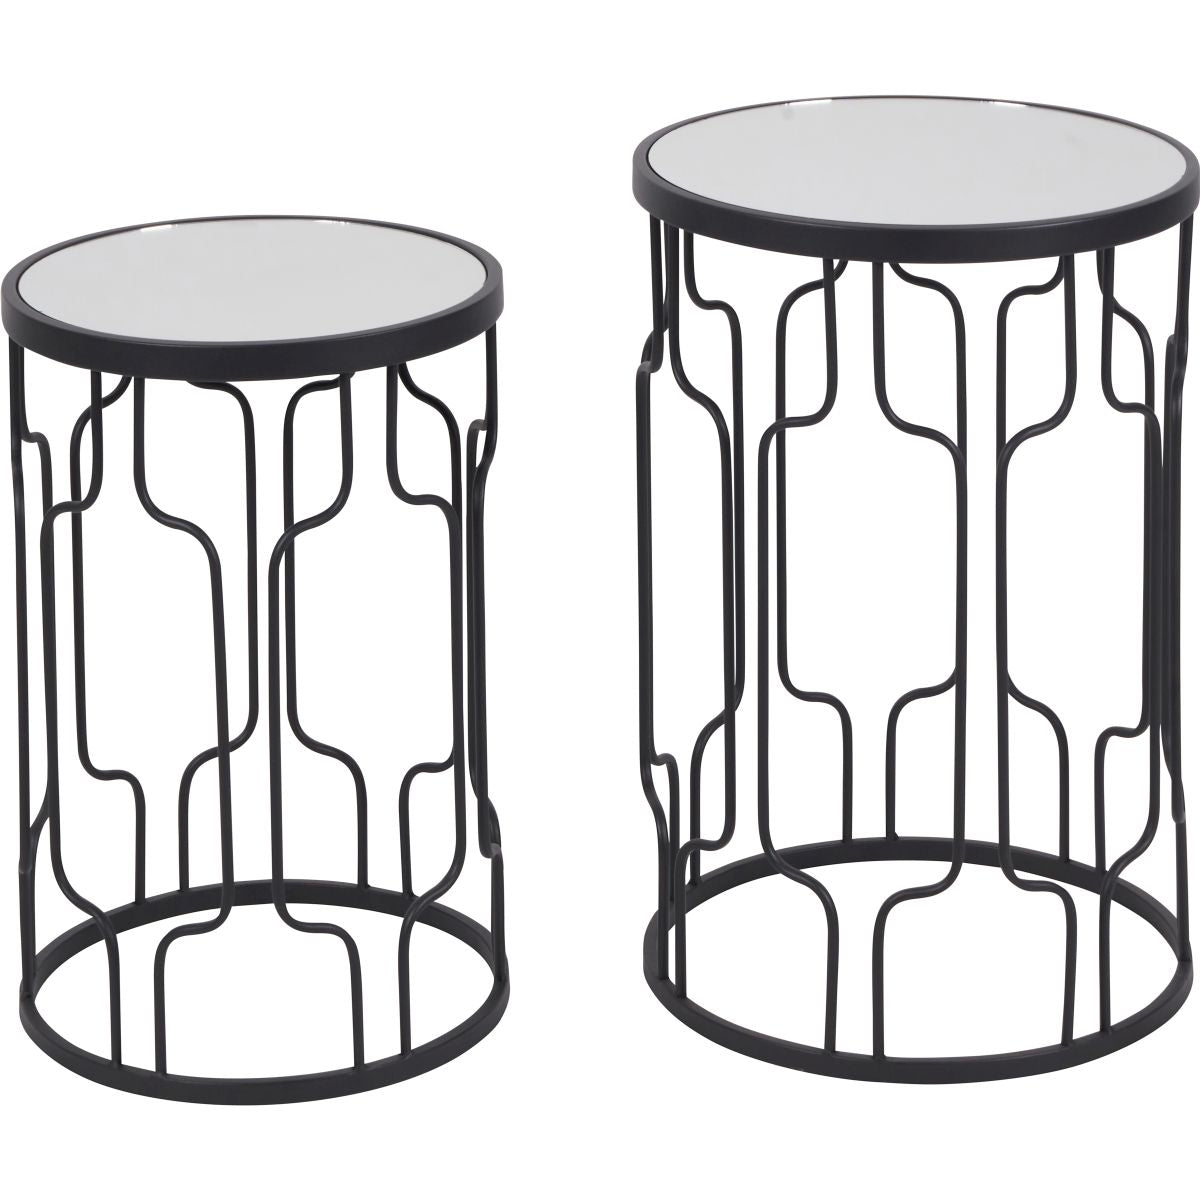 S/2 Caprisse Mirrored Glass and Graphite Metal Round Tables